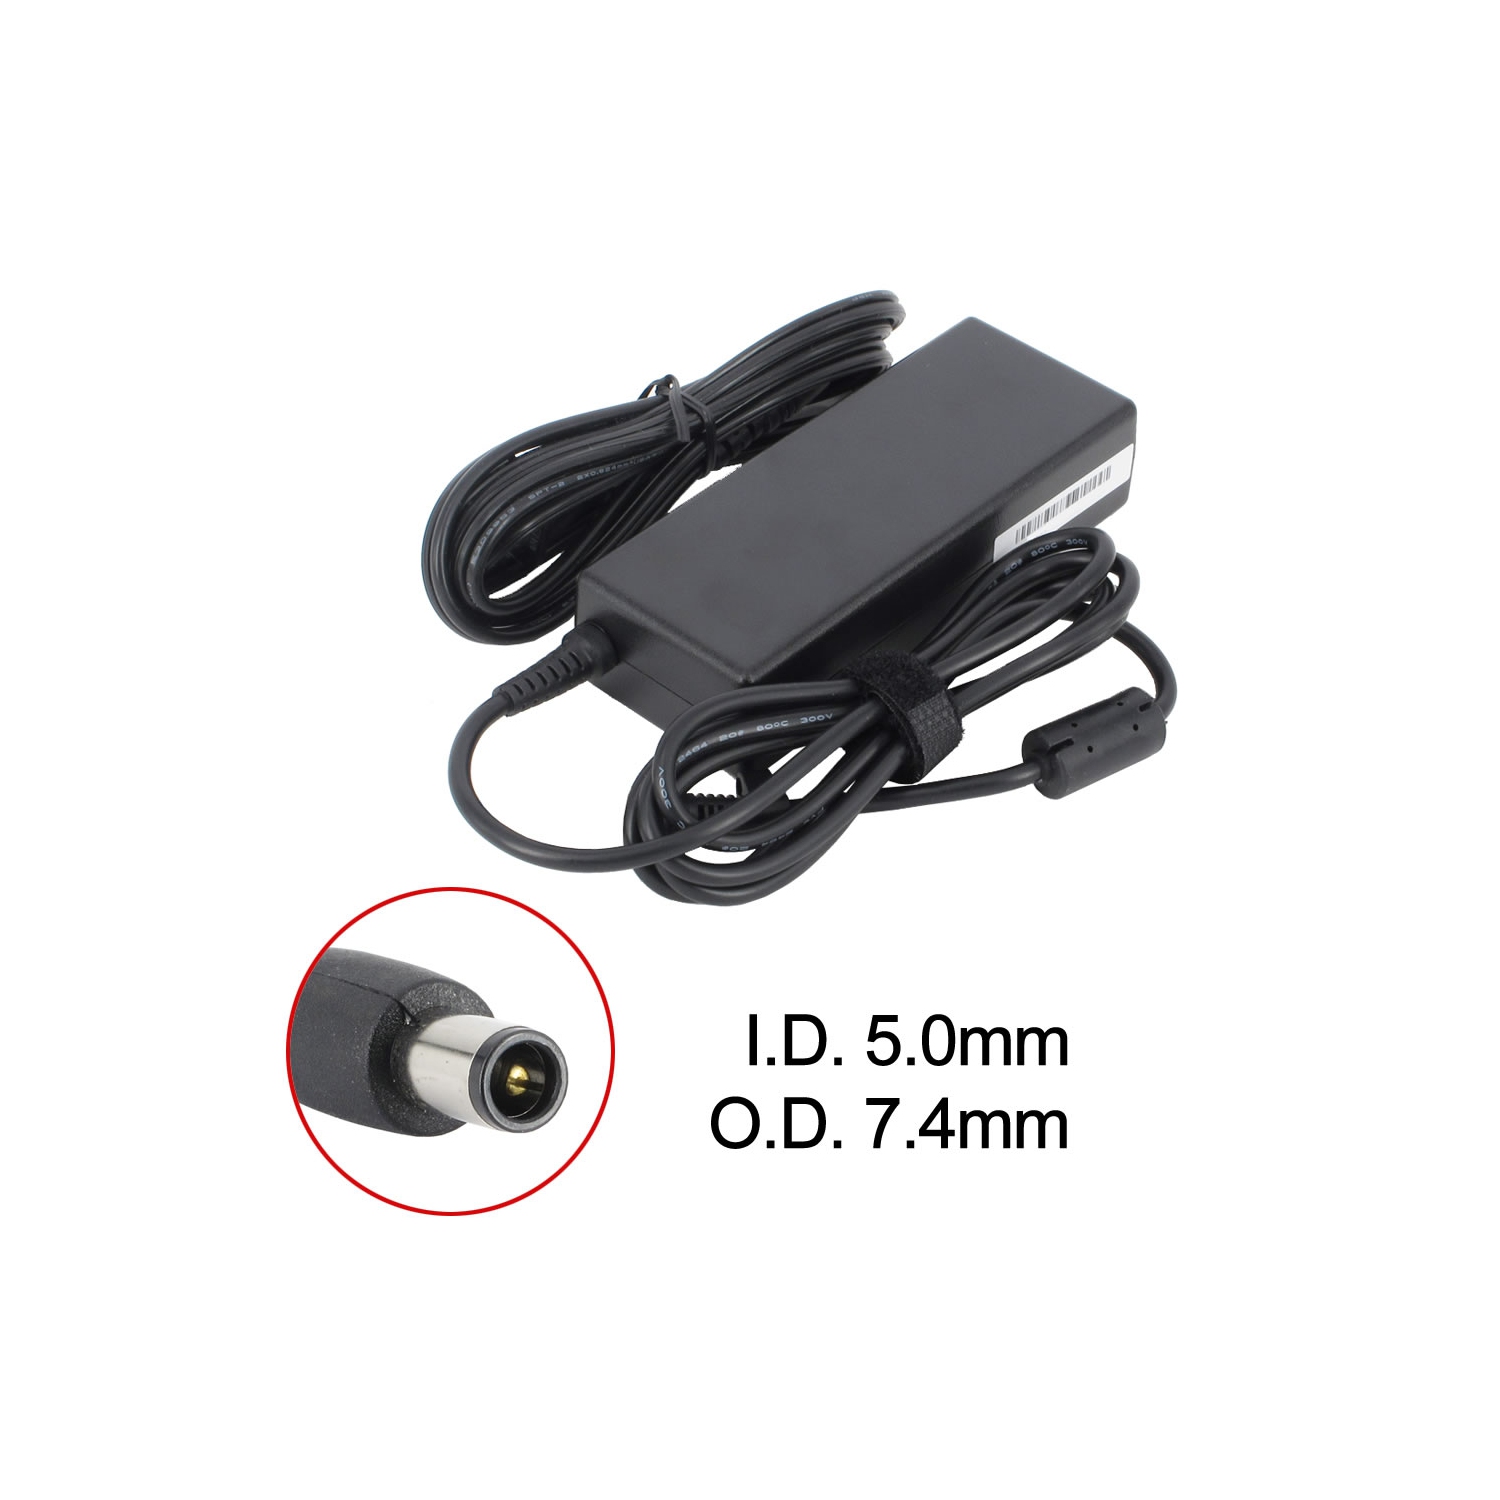 New Laptop AC Adapter for Dell Inspiron 14Z-158, 09T215, 310-7251, 310-9376, 331-5968, CF823, FA90PM135, N6M8J, TJ76K